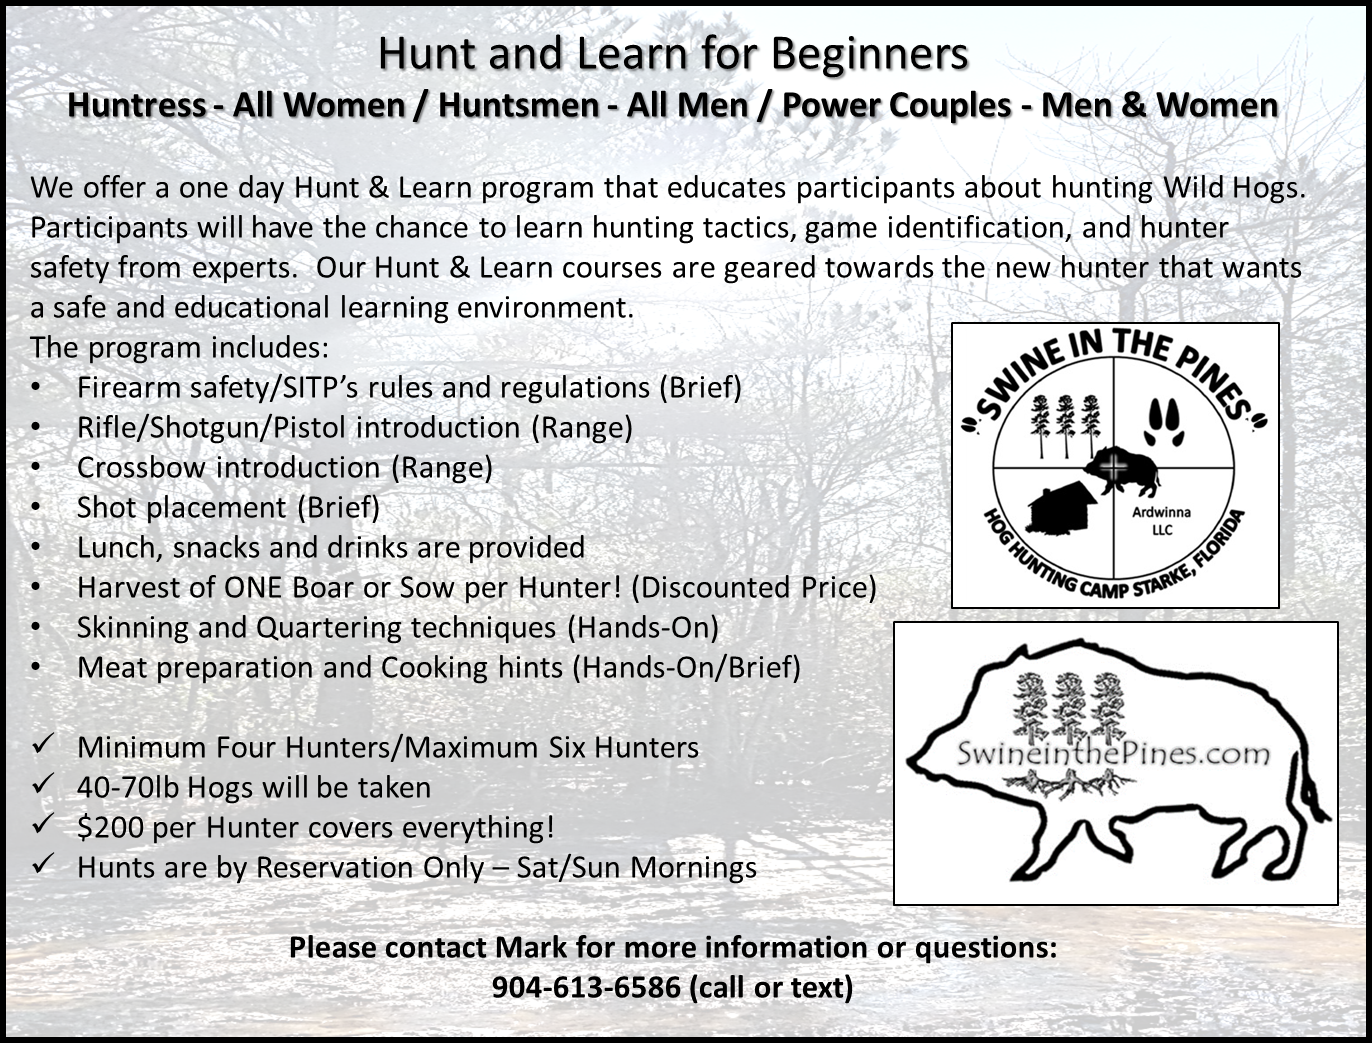 Hunt and Learn at Swine In The Pines